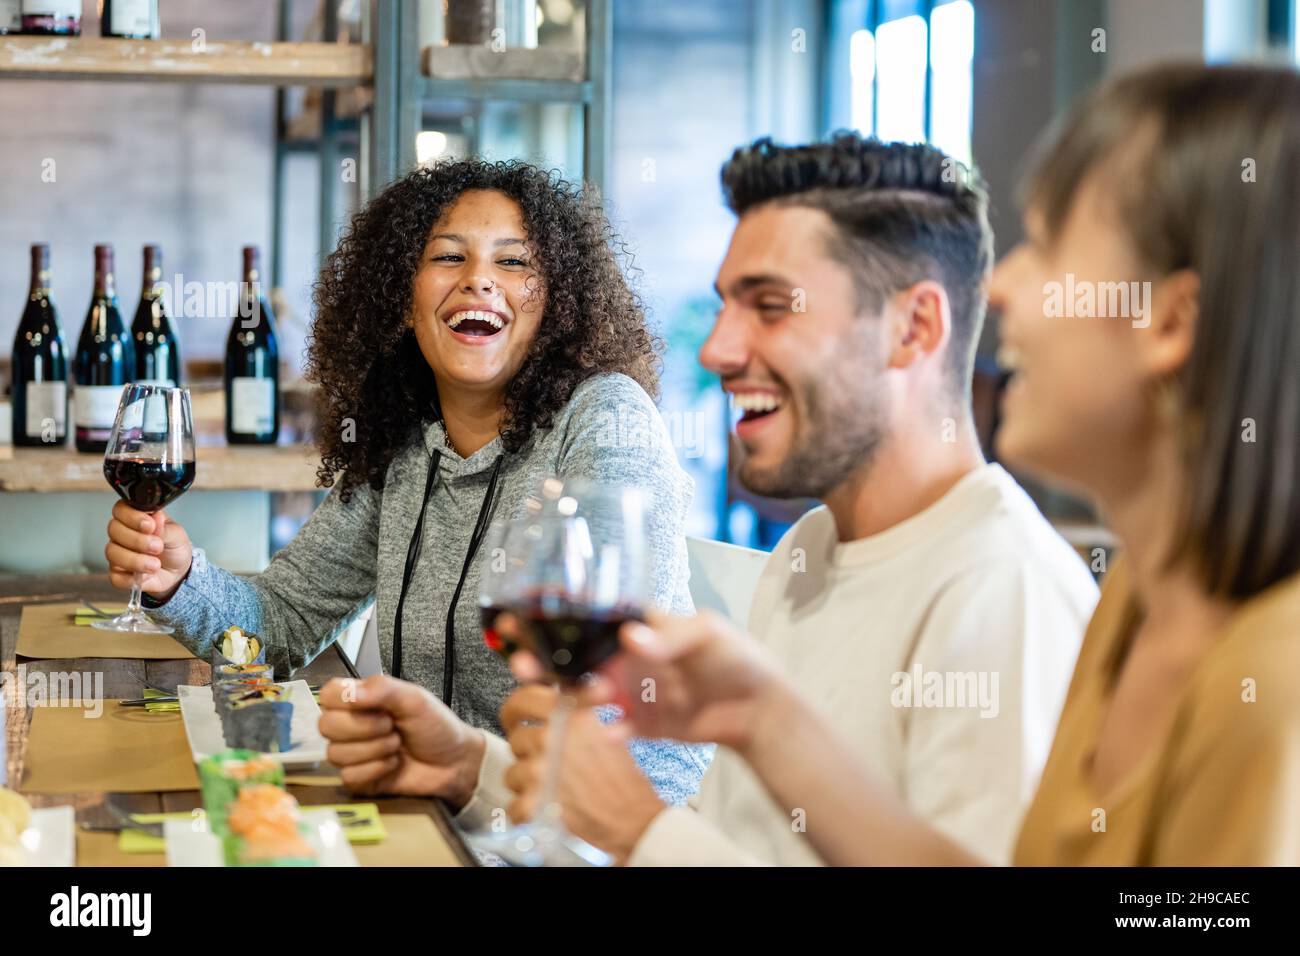 Group of young people having lunch at restaurant, millennials having fun together on a day of celebration, toasting with glasses of red wine Stock Photo